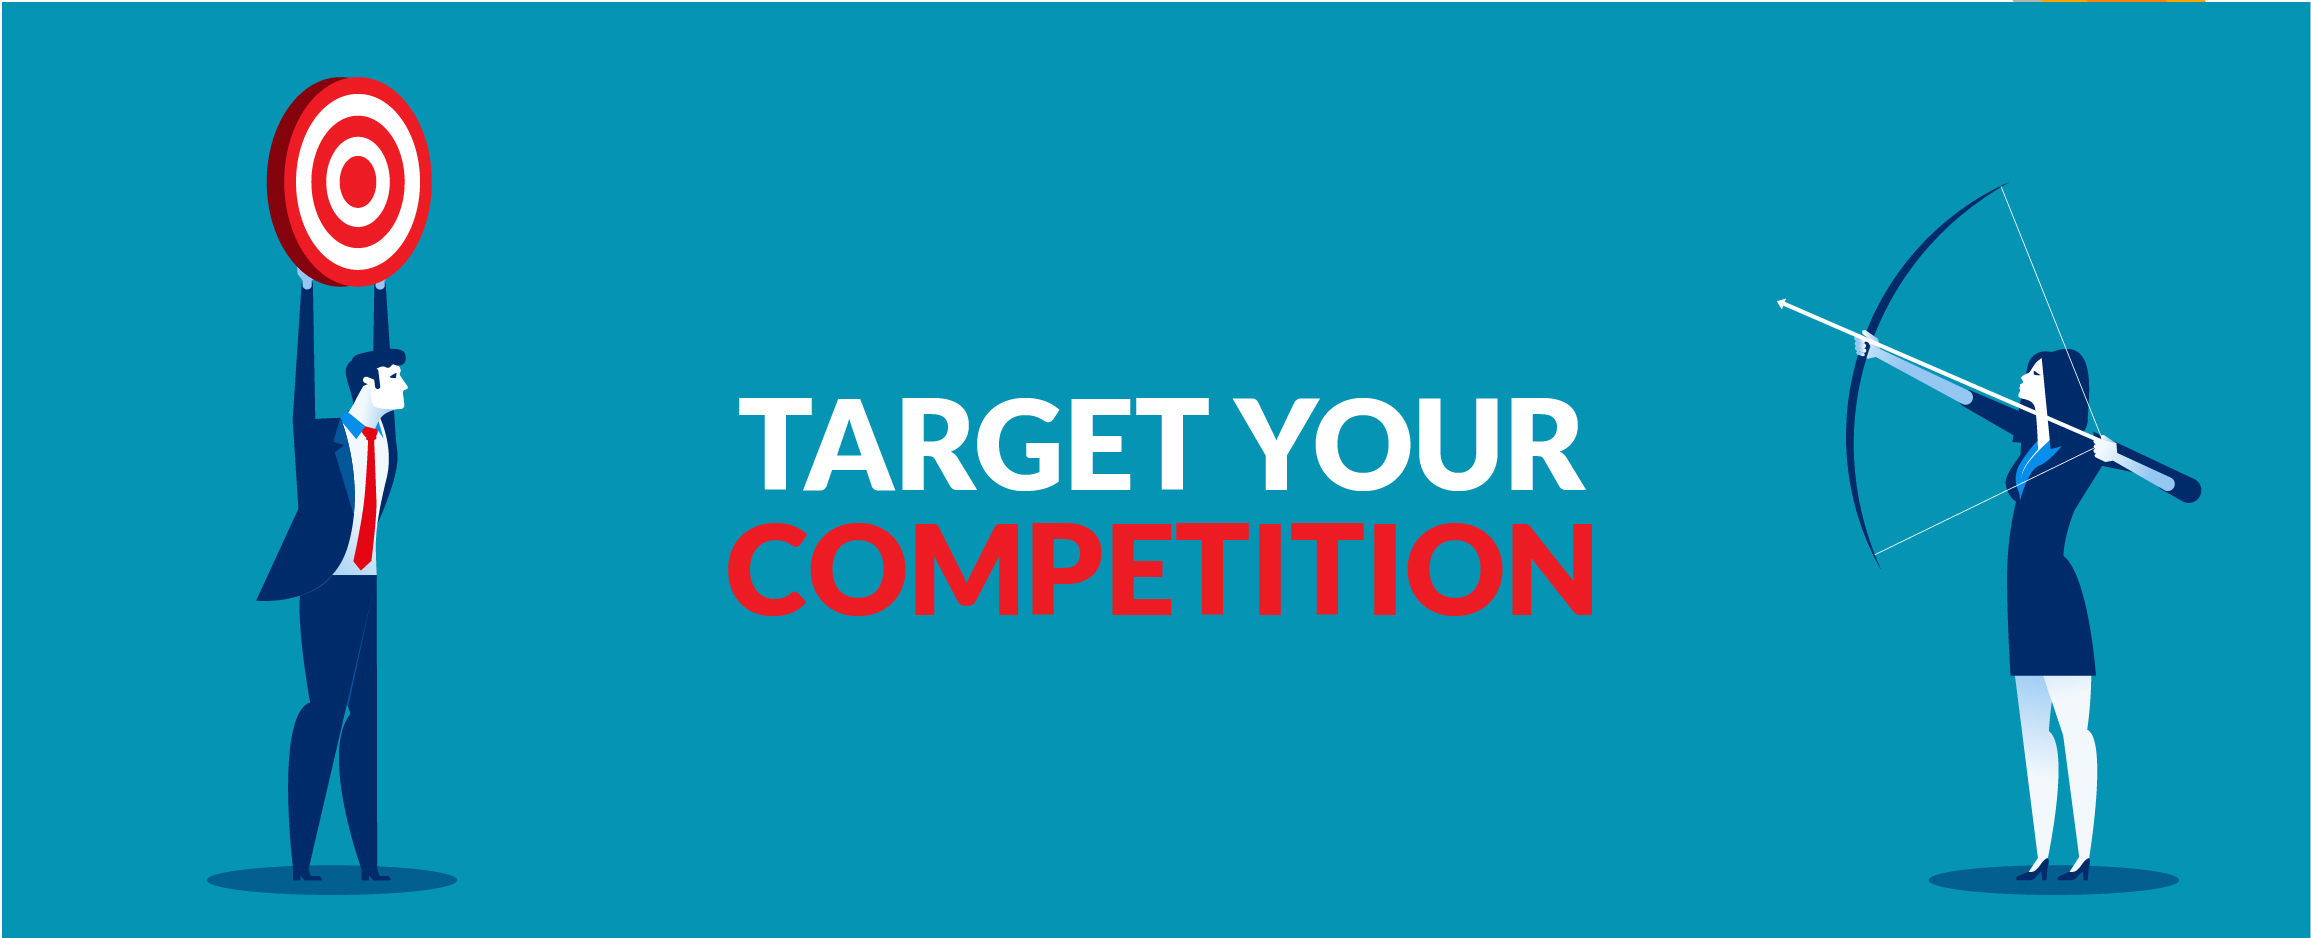 Target your competition 